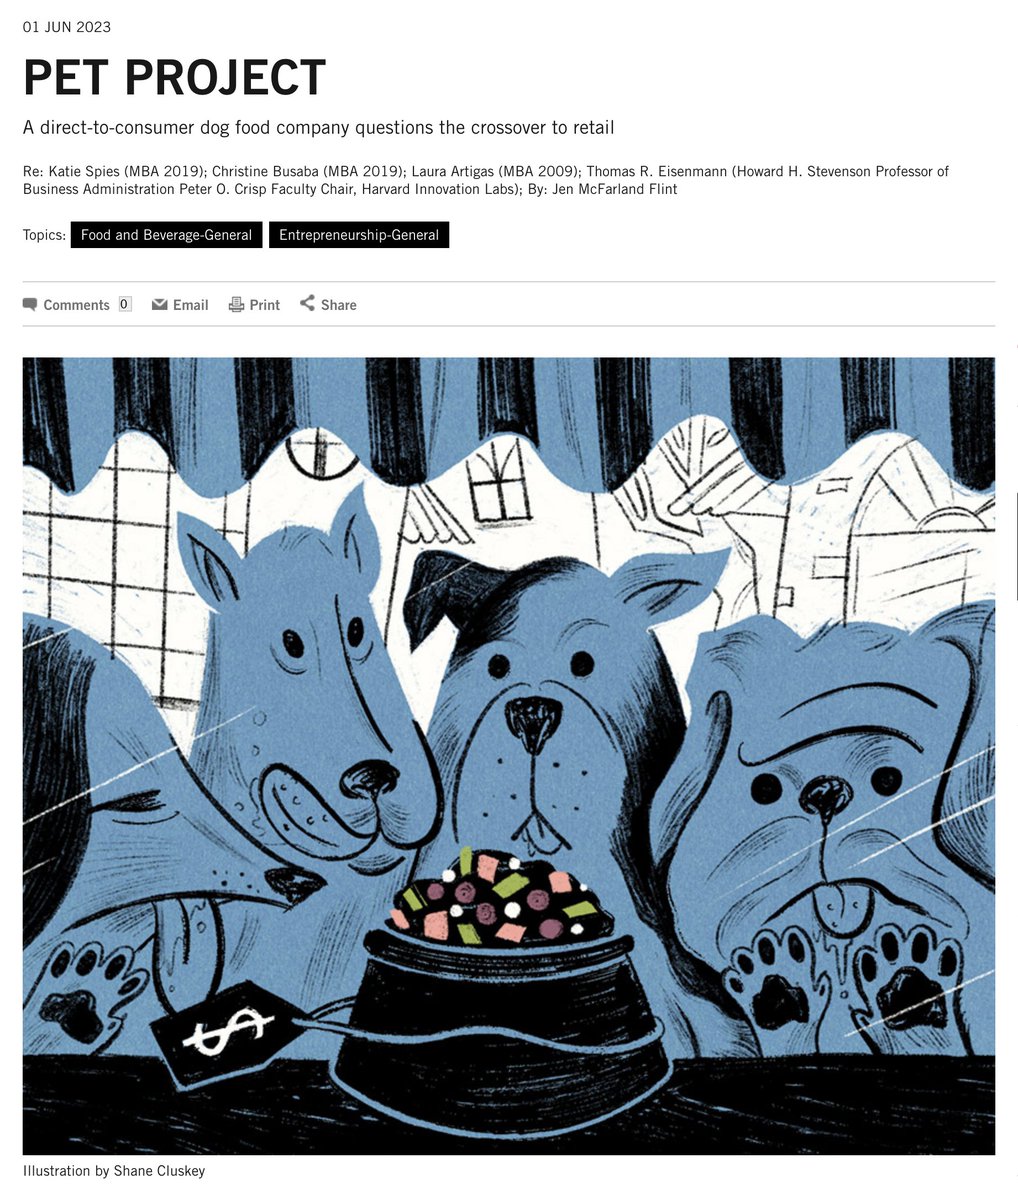 Dog Food, by Shane Cluskey (lnkd.in/emBQVMSM) 
#Illustration for @HarvardHBS about a direct-to-consumer #dogfood company questioning the crossover to retail
Find the article here: lnkd.in/etbmrJJc
#business #shanecluskey #illustrationzone #editorialillustration #art